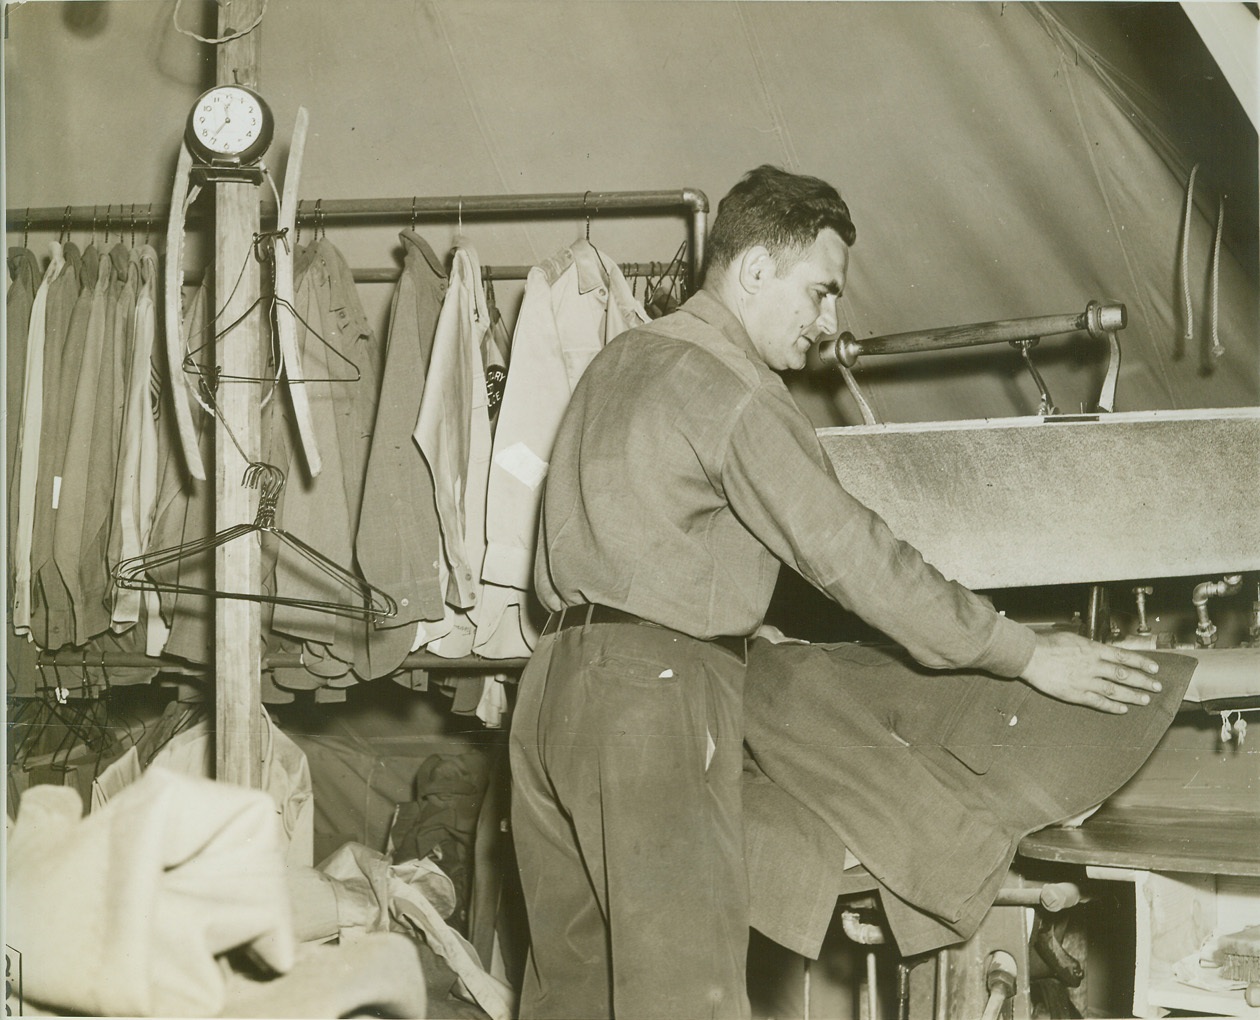 FIELD TAILOR SHOP MANESS, N.C. 10/26/1941.– Irving Levinson, a tailor by trade, keeps in trim caring for special troops of the 26th Division. His new shop is a tent in the camp area. Here, the New Yorker does some pressing. A kerosene fired steam boiler operates the presser. Credit: OWI Radiophoto from ACME